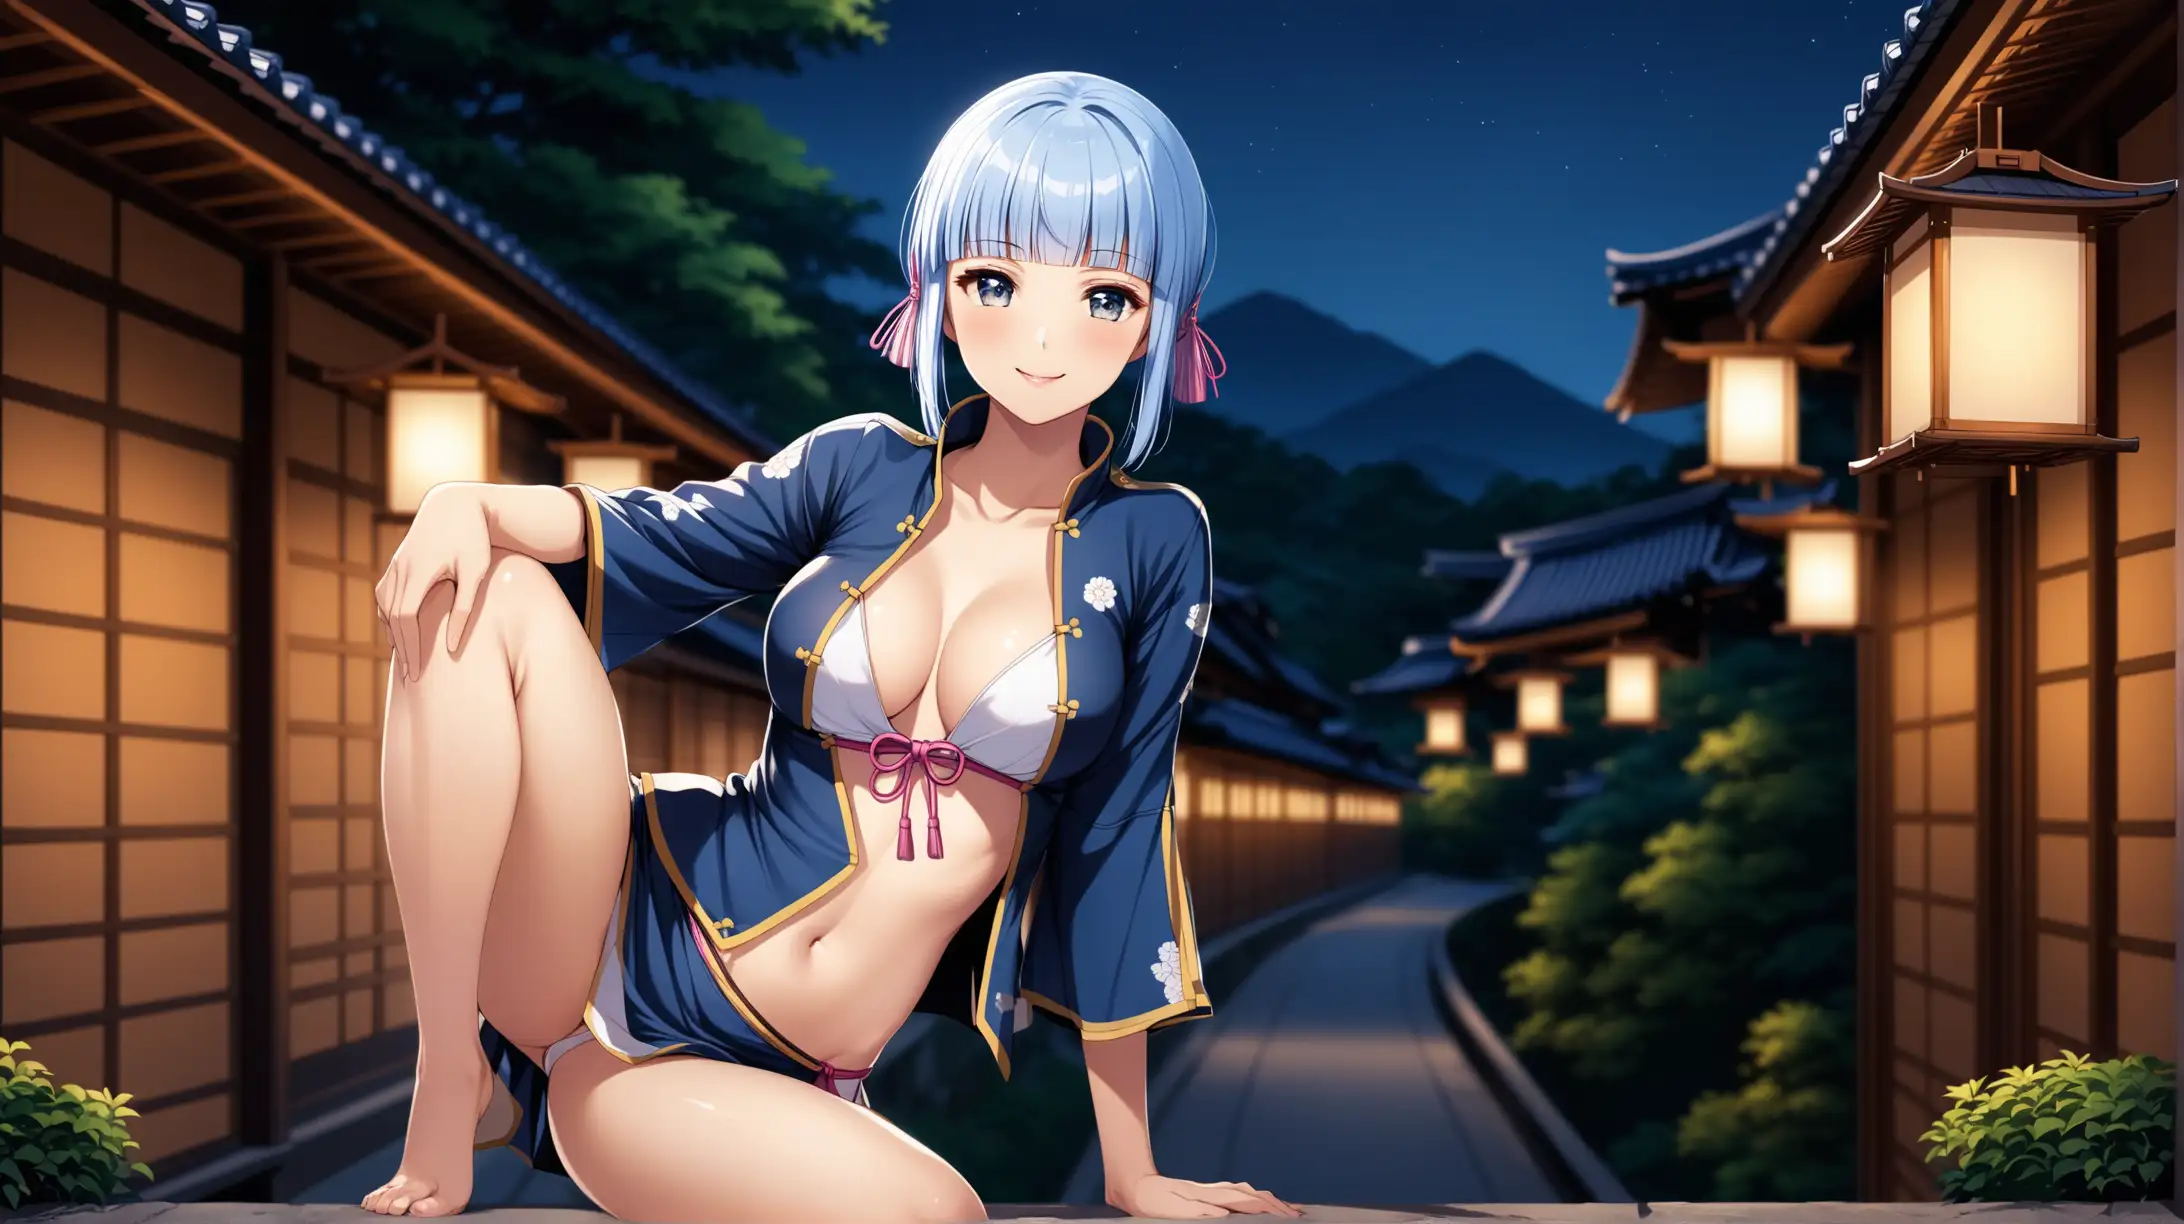 Draw the character Ayaka Kamisato, high quality, dim lighting, long shot, outdoors, seductive pose, revealing outfit, erotic, smiling at the viewer